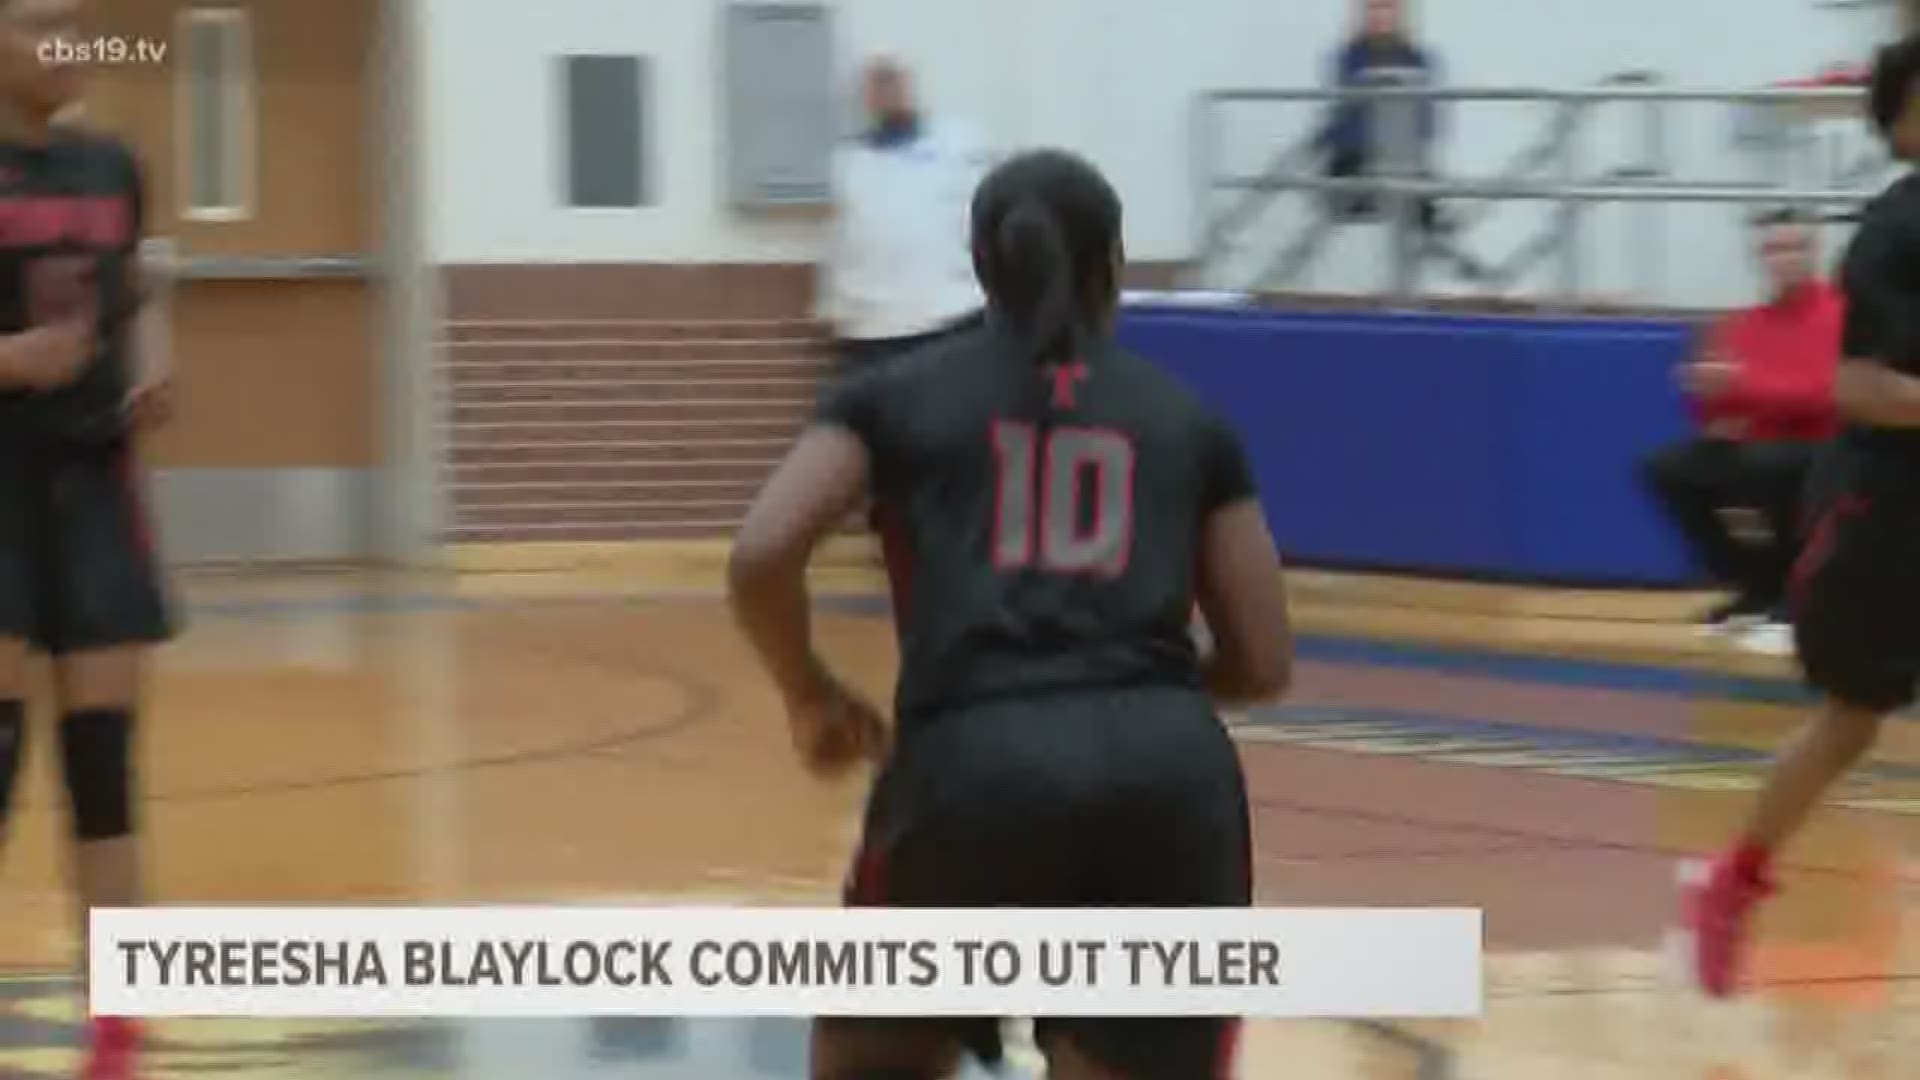 Lee basketball player commits to UT Tyler